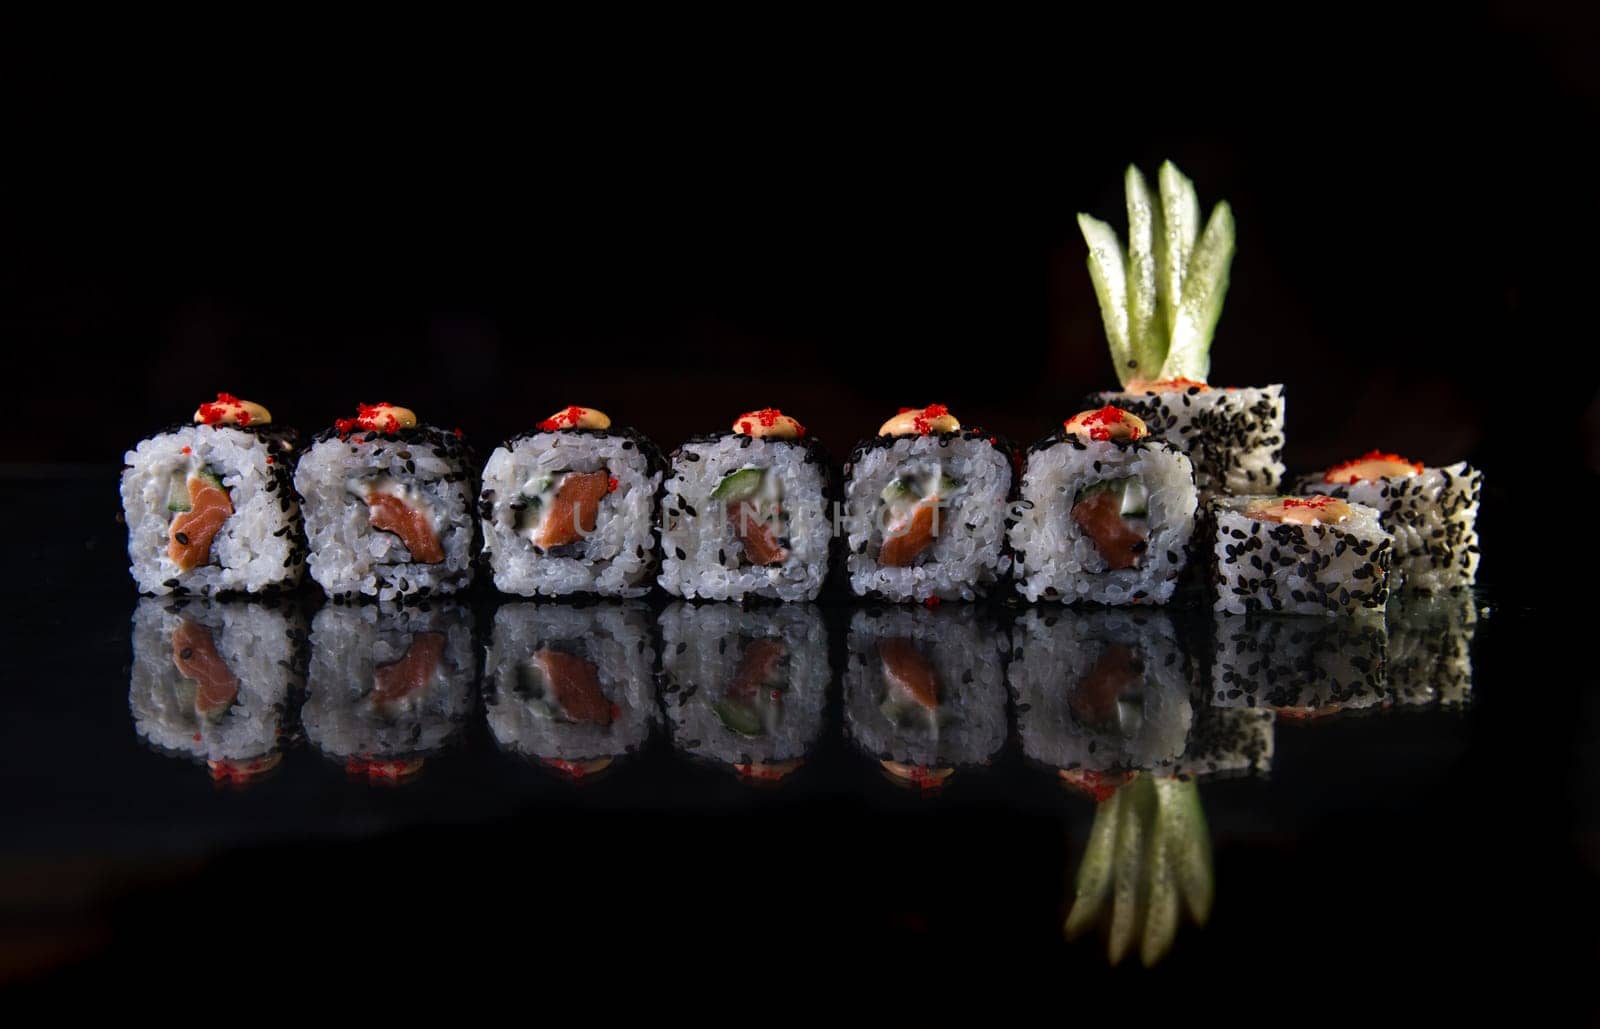 sushi with fish and chia seeds on a black background.